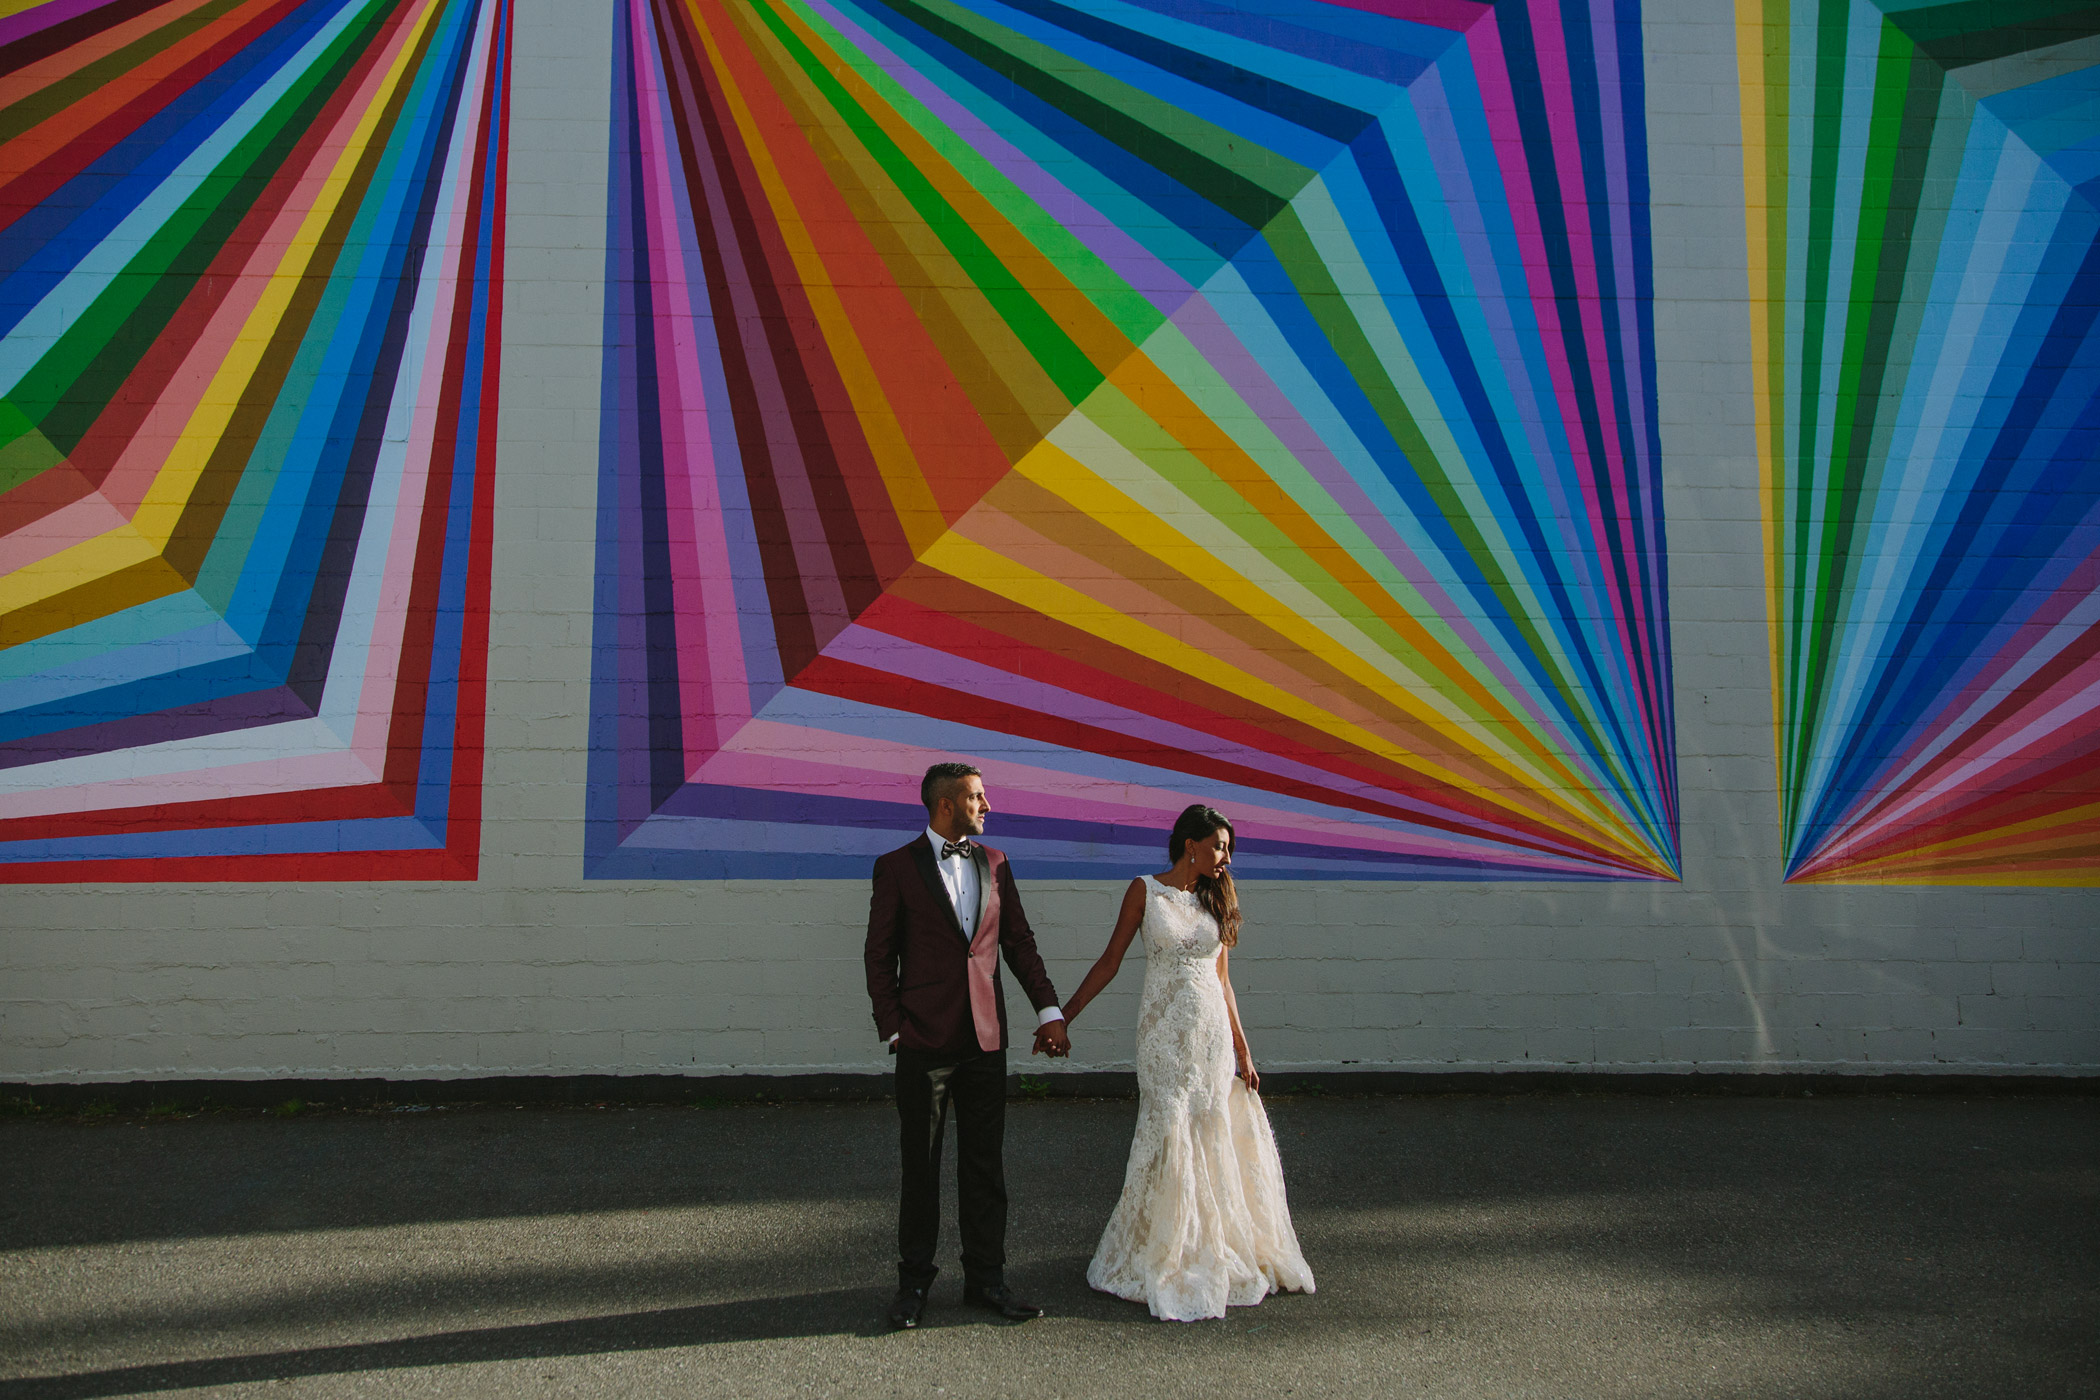 Vancouver Rainbow Mural with Bride and Groom